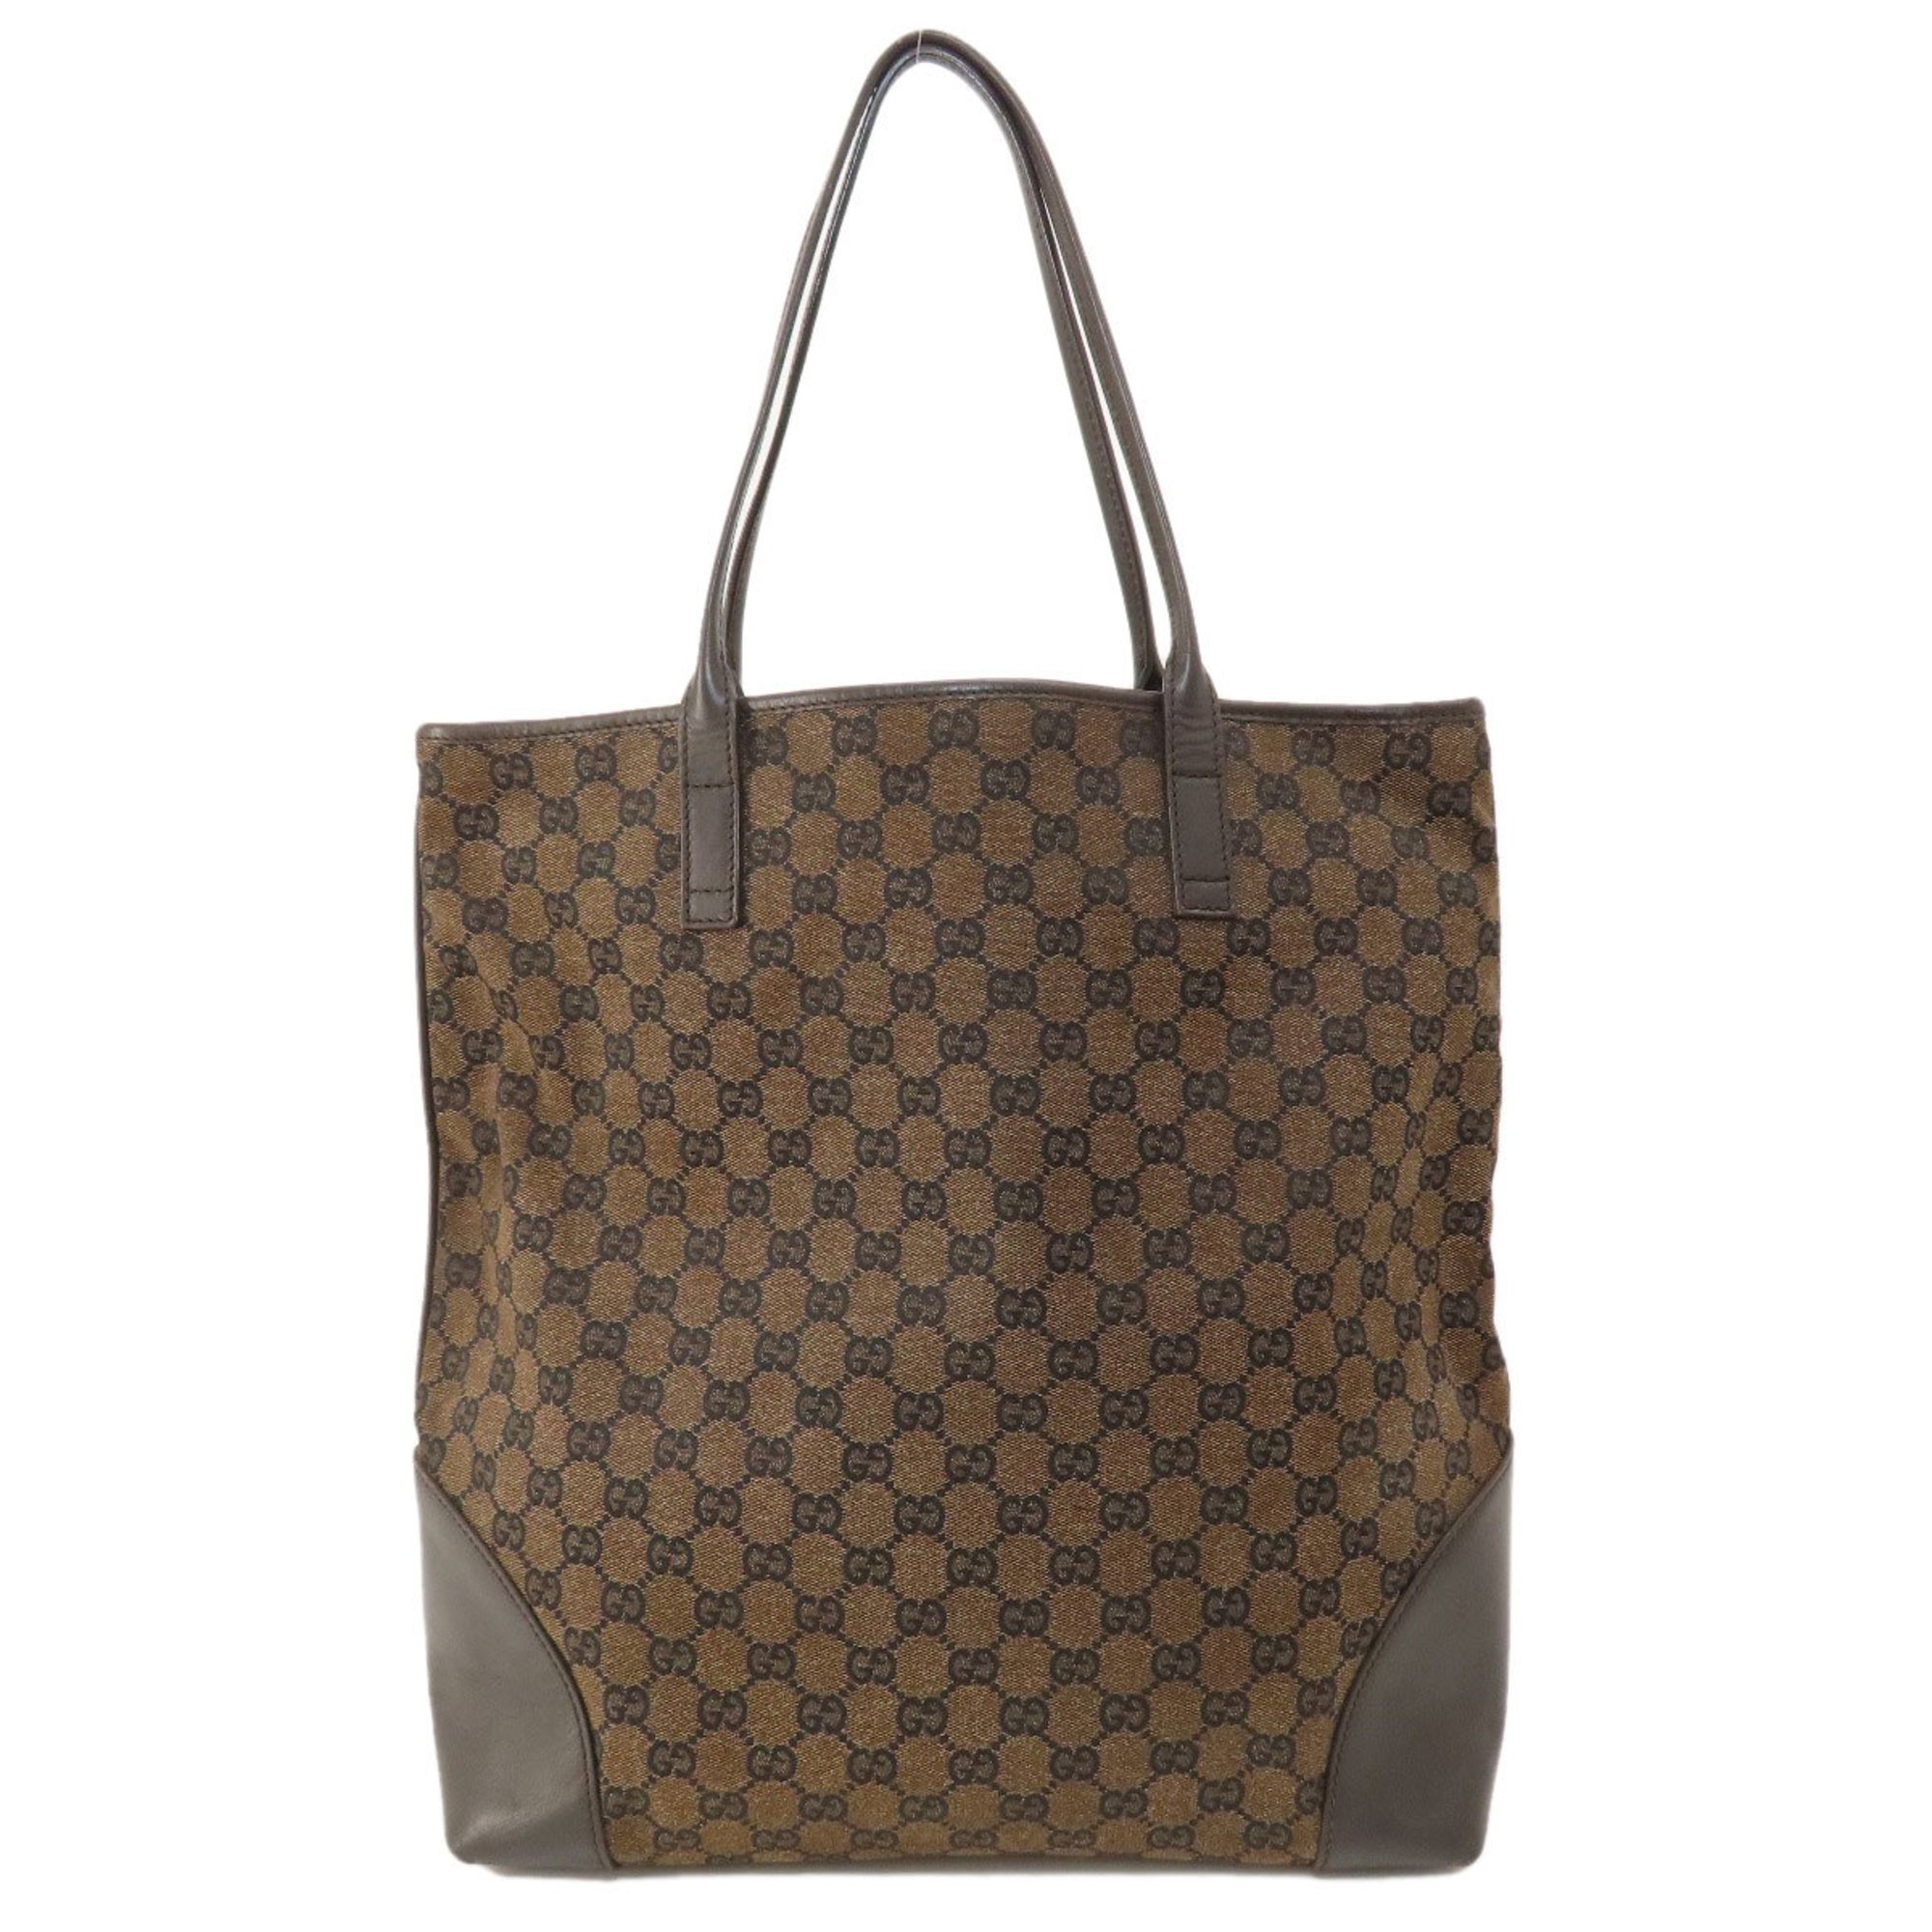 Gucci 263345 GG Outlet Tote Bag Canvas Women's GUCCI